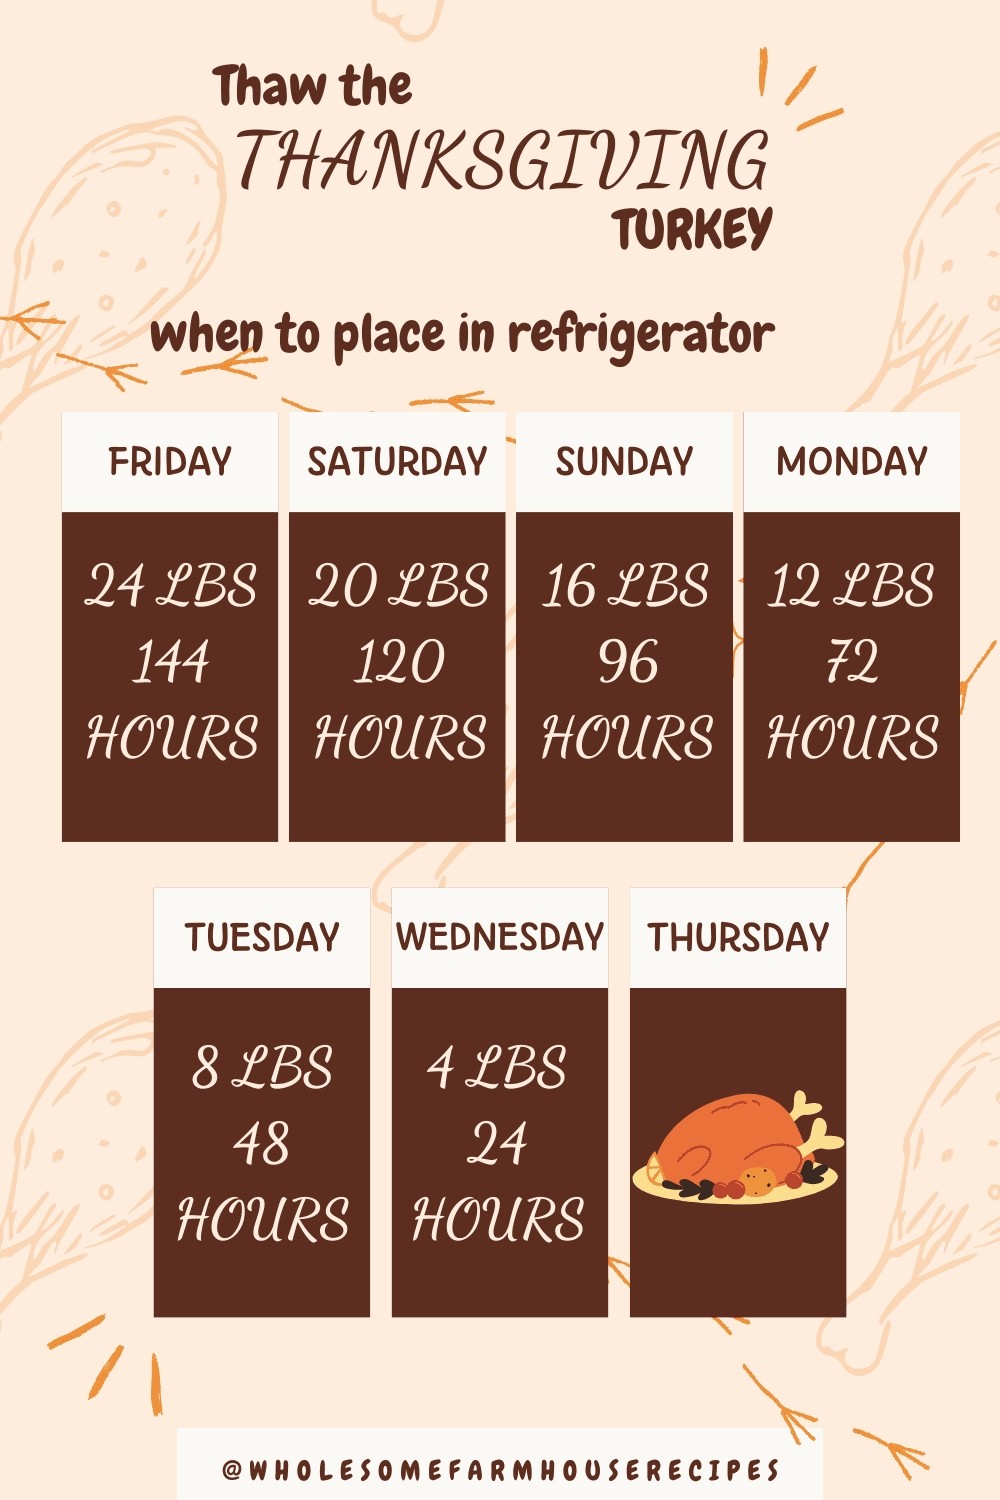 Thanksgiving Turkey Thawing Chart for Refrigerator